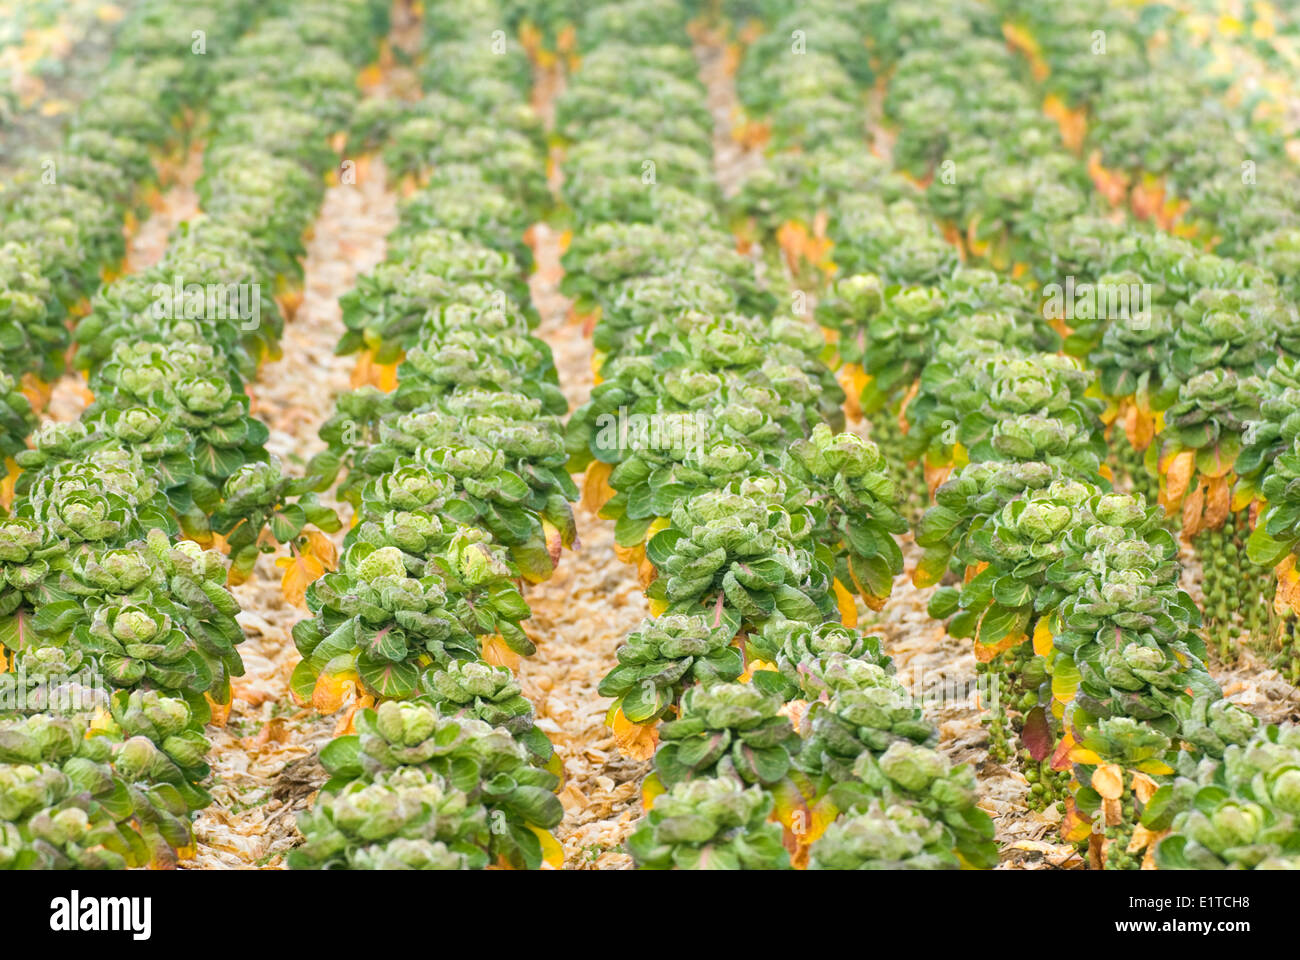 brusselsprouts in winter Stock Photo